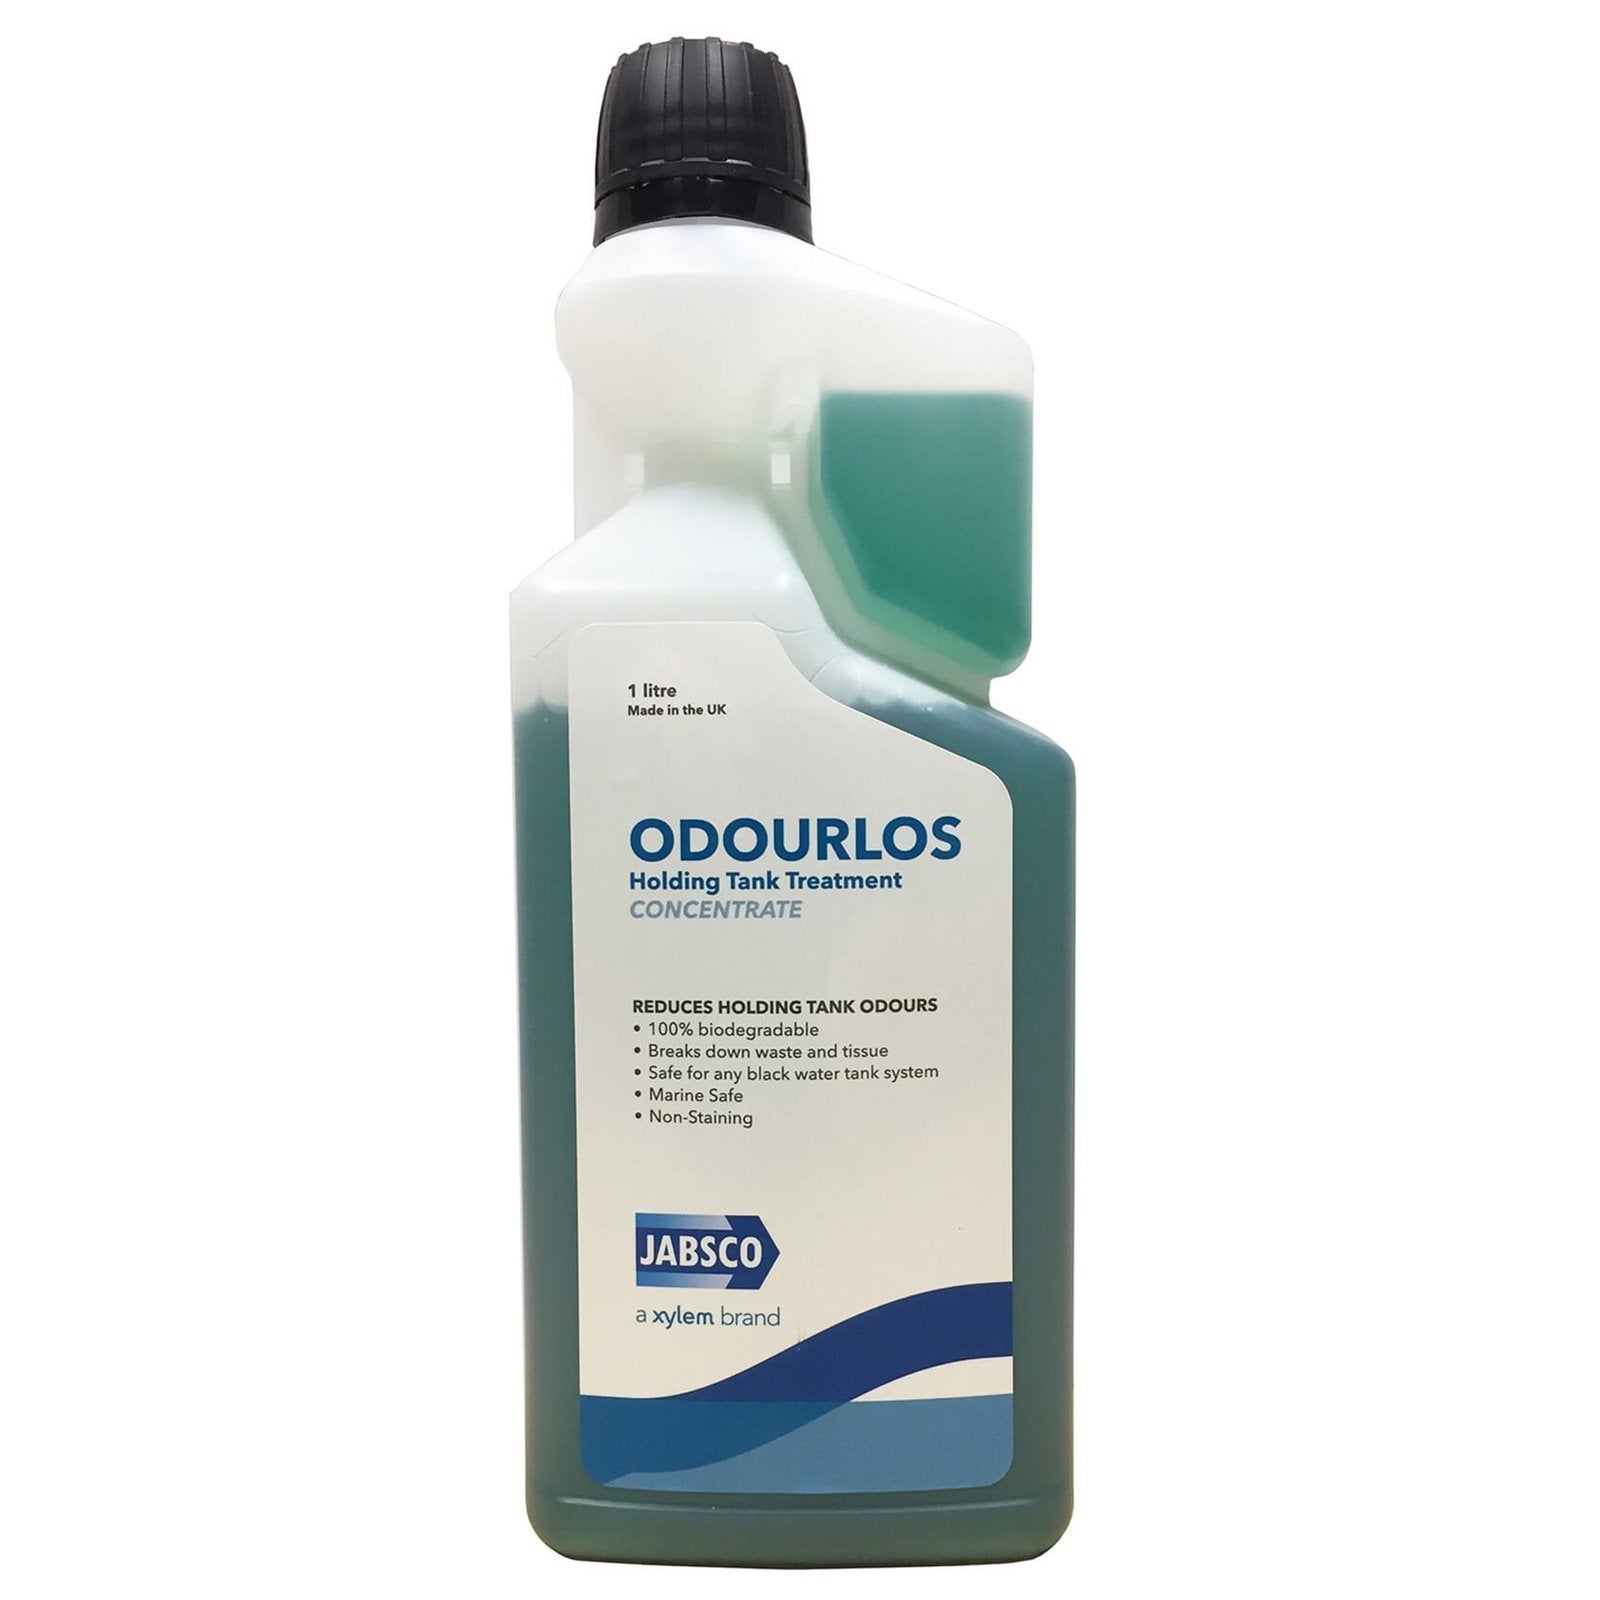 Jabsco Odourlos Toilet Holding Tank Treatment Concentrate - 1 LTR